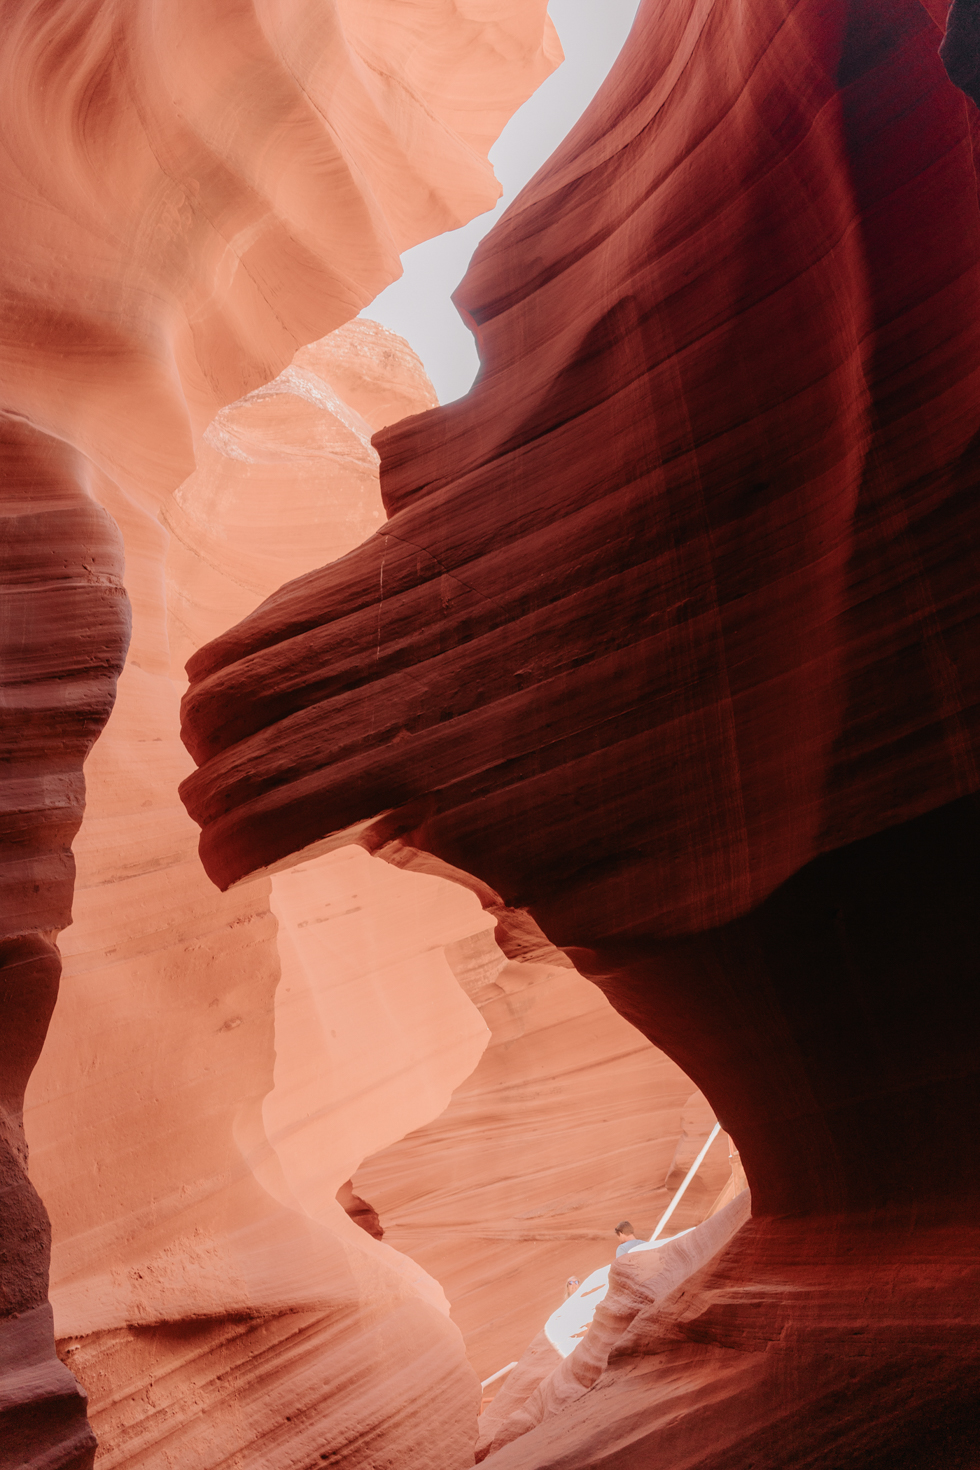 Lower Antelope Canyon - The ultimate 7-day Southwest road-trip #RoadTrip #USA - Day by day itinerary and the best parks to visit in Utah, Nevada, and Arizona